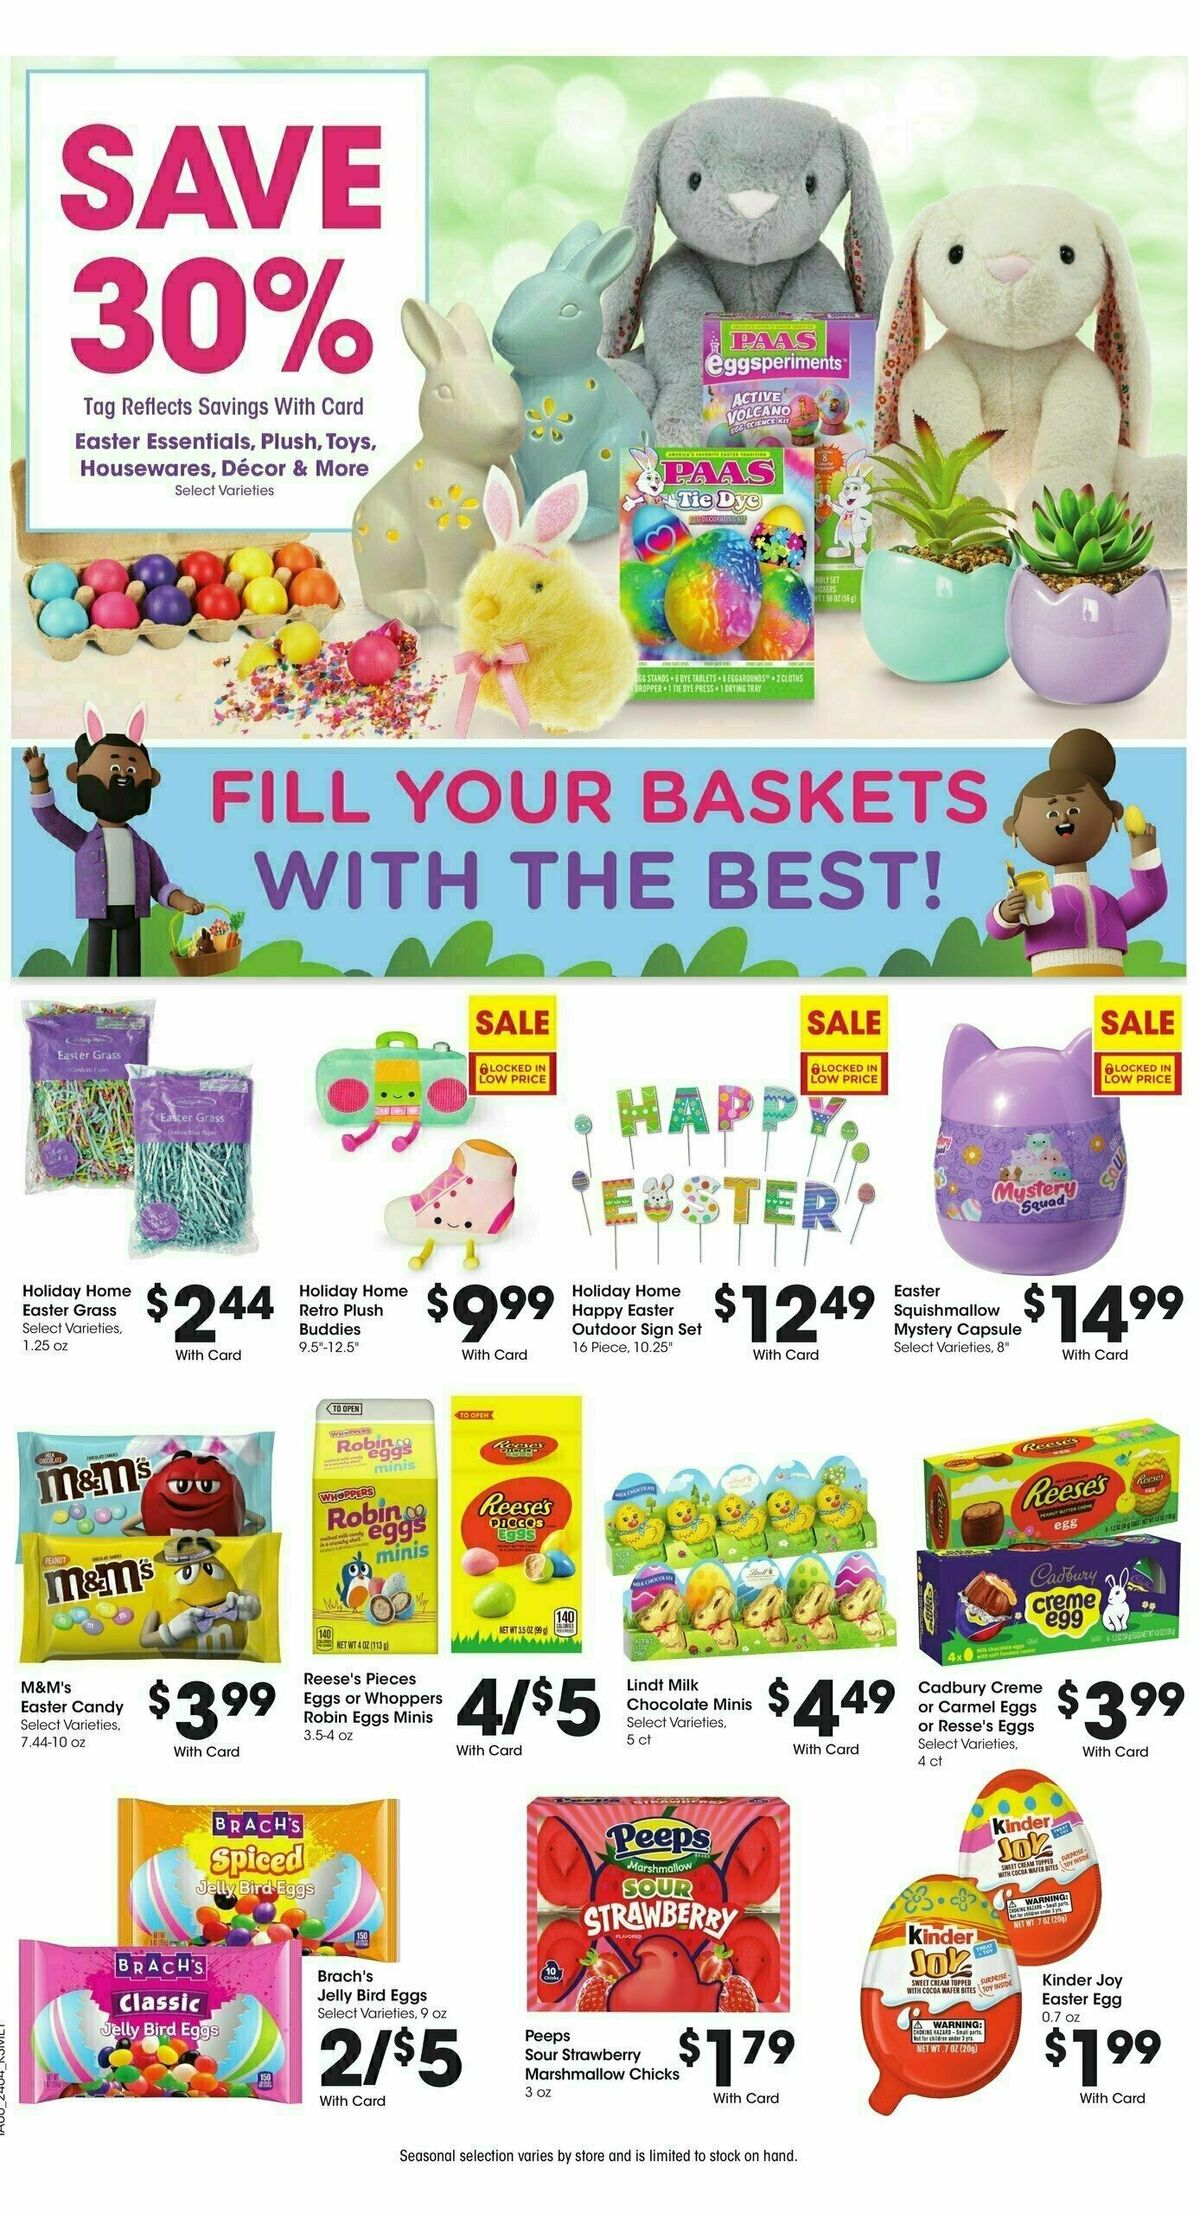 King Soopers Weekly Ad from February 28